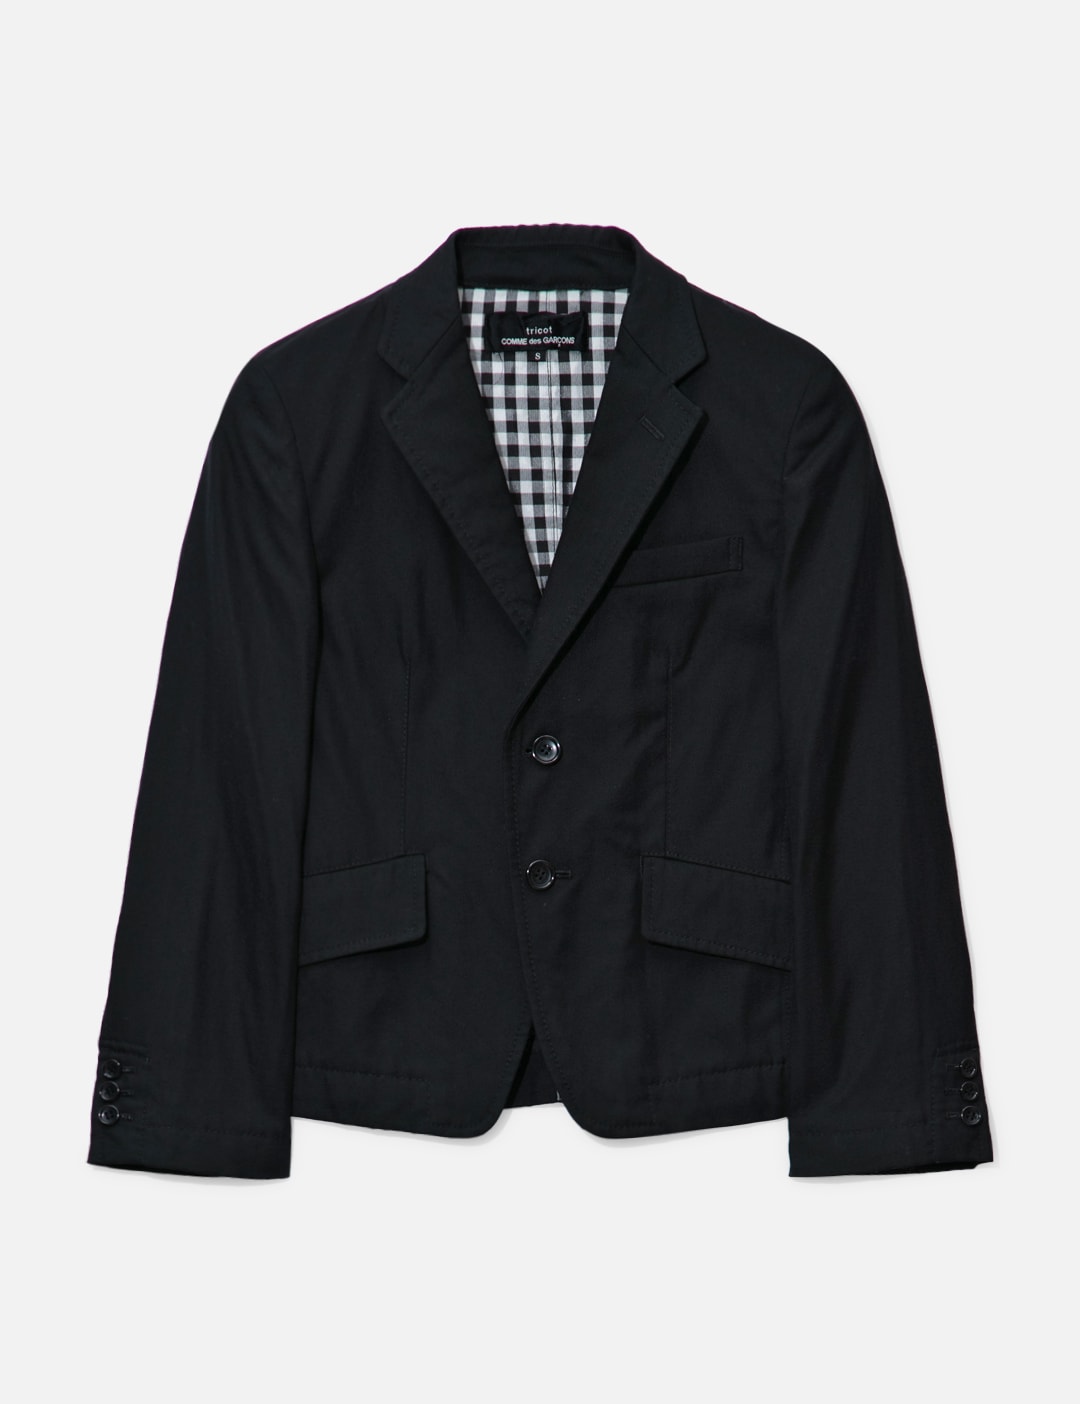 Needles - Sport Jacket  HBX - Globally Curated Fashion and